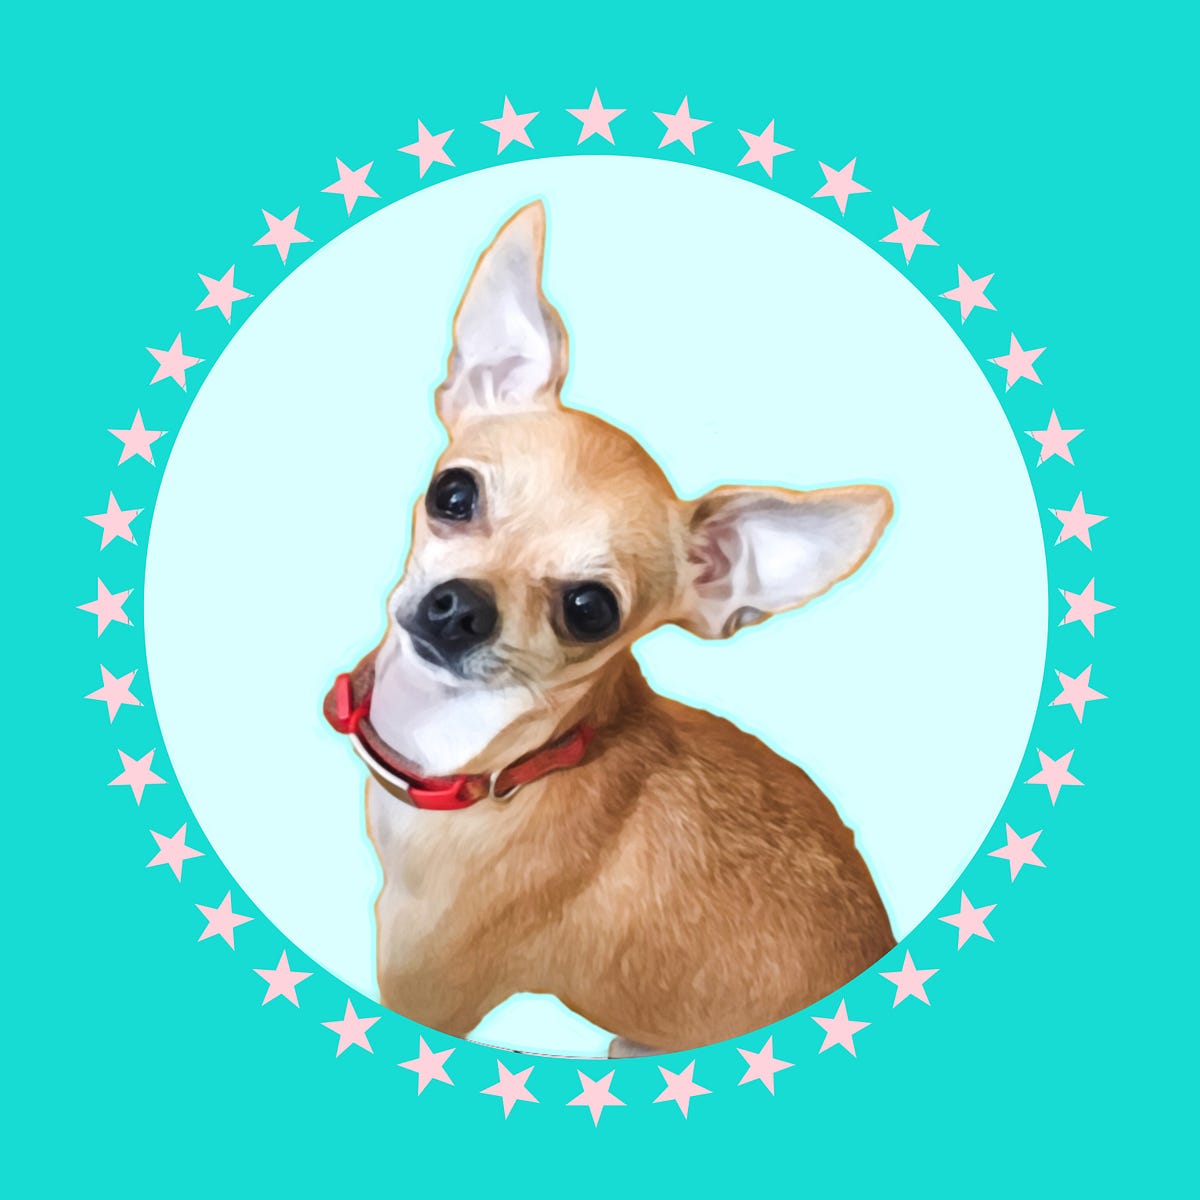 25 Life Lessons I learned from a Chihuahua | by B. Renate | Medium